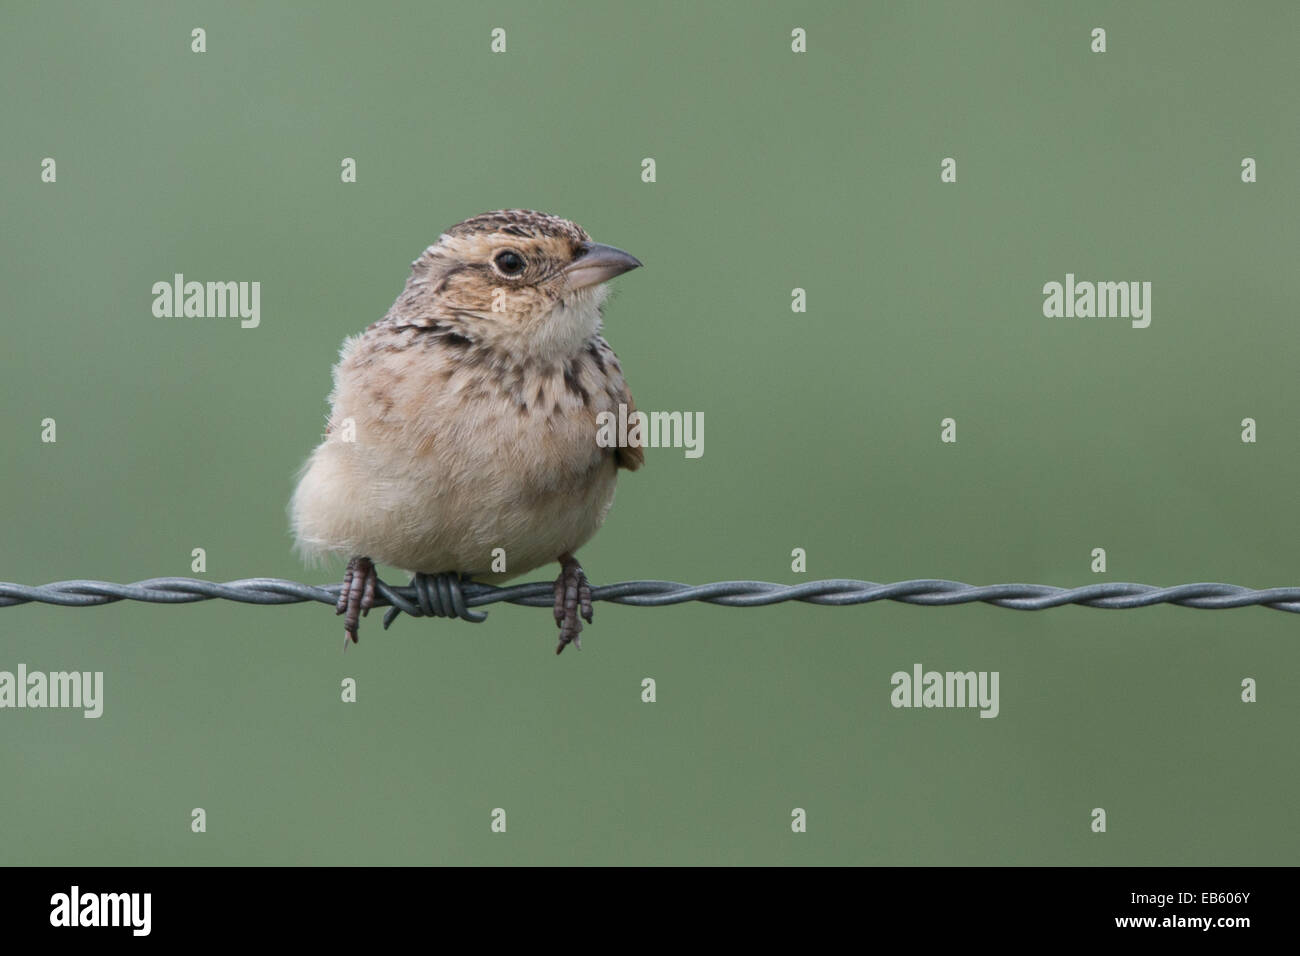 Singing Bushlark (Mirafra javanica) perched on a barbed wire Stock Photo